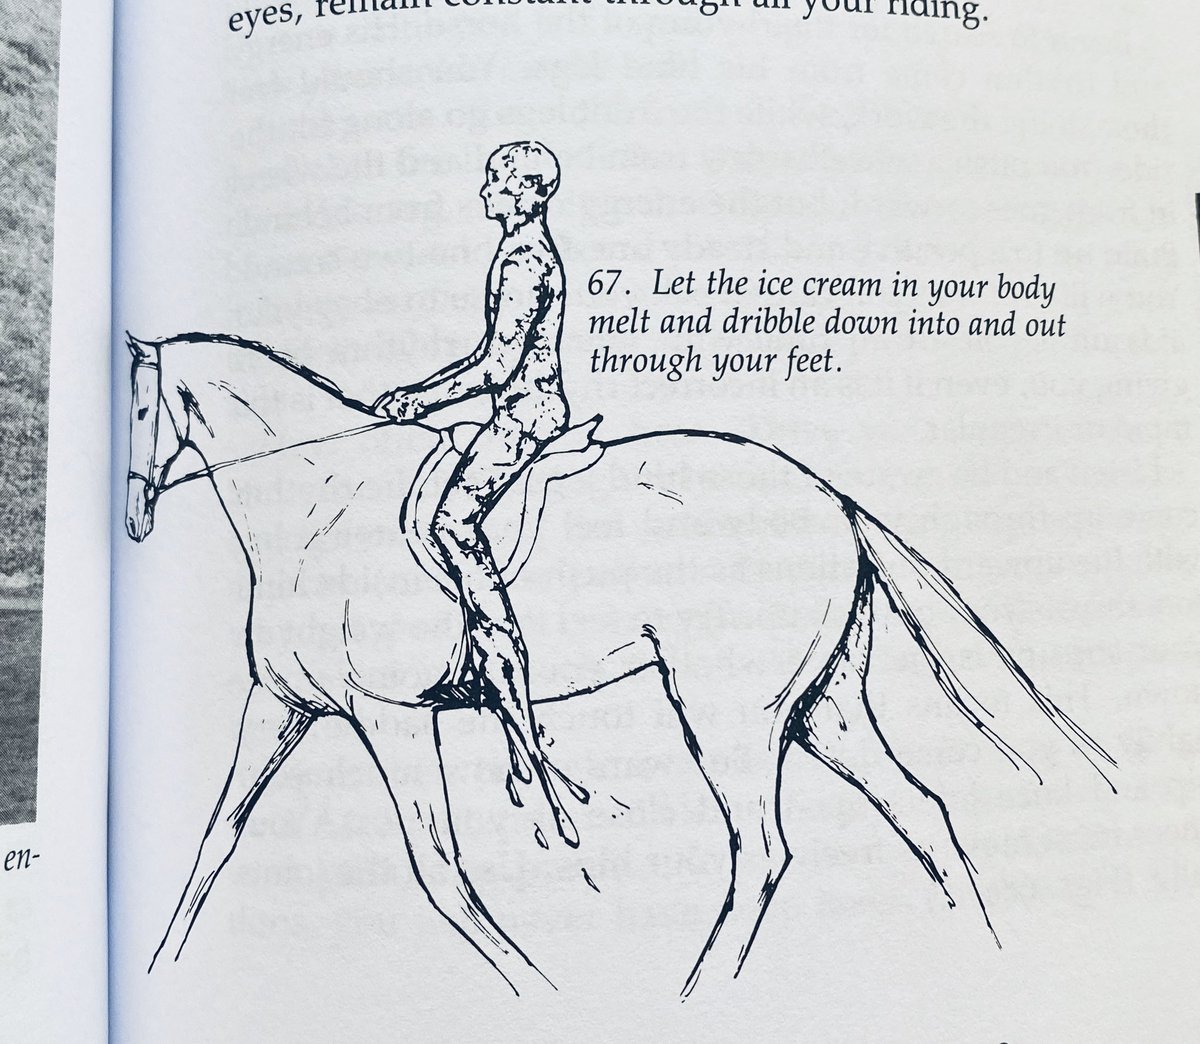 The illustrations in this horseback riding book are making me feel weird